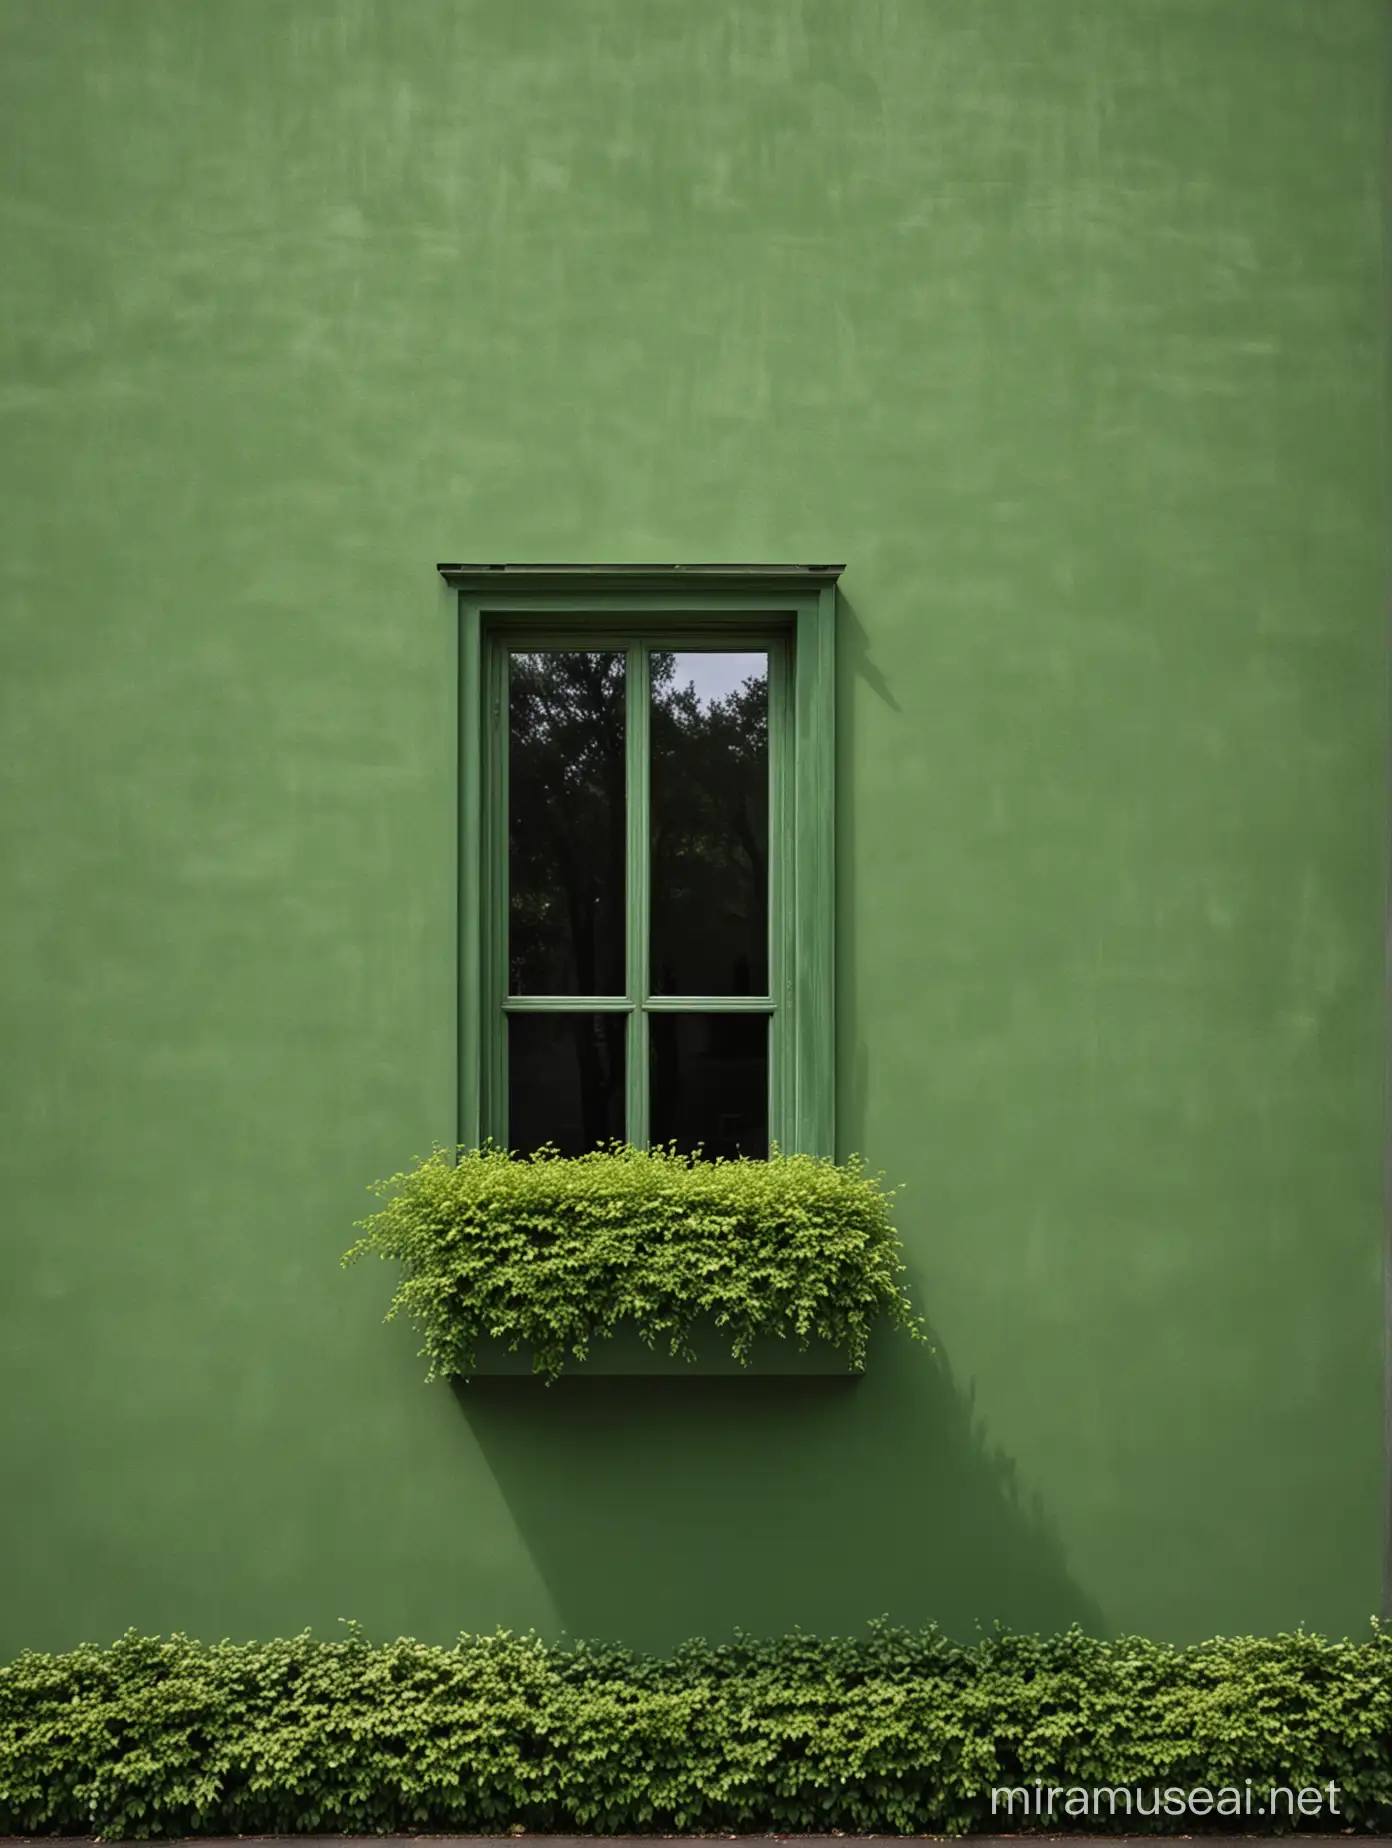 Minimalist Green Wall with Window in Vibrant Colors